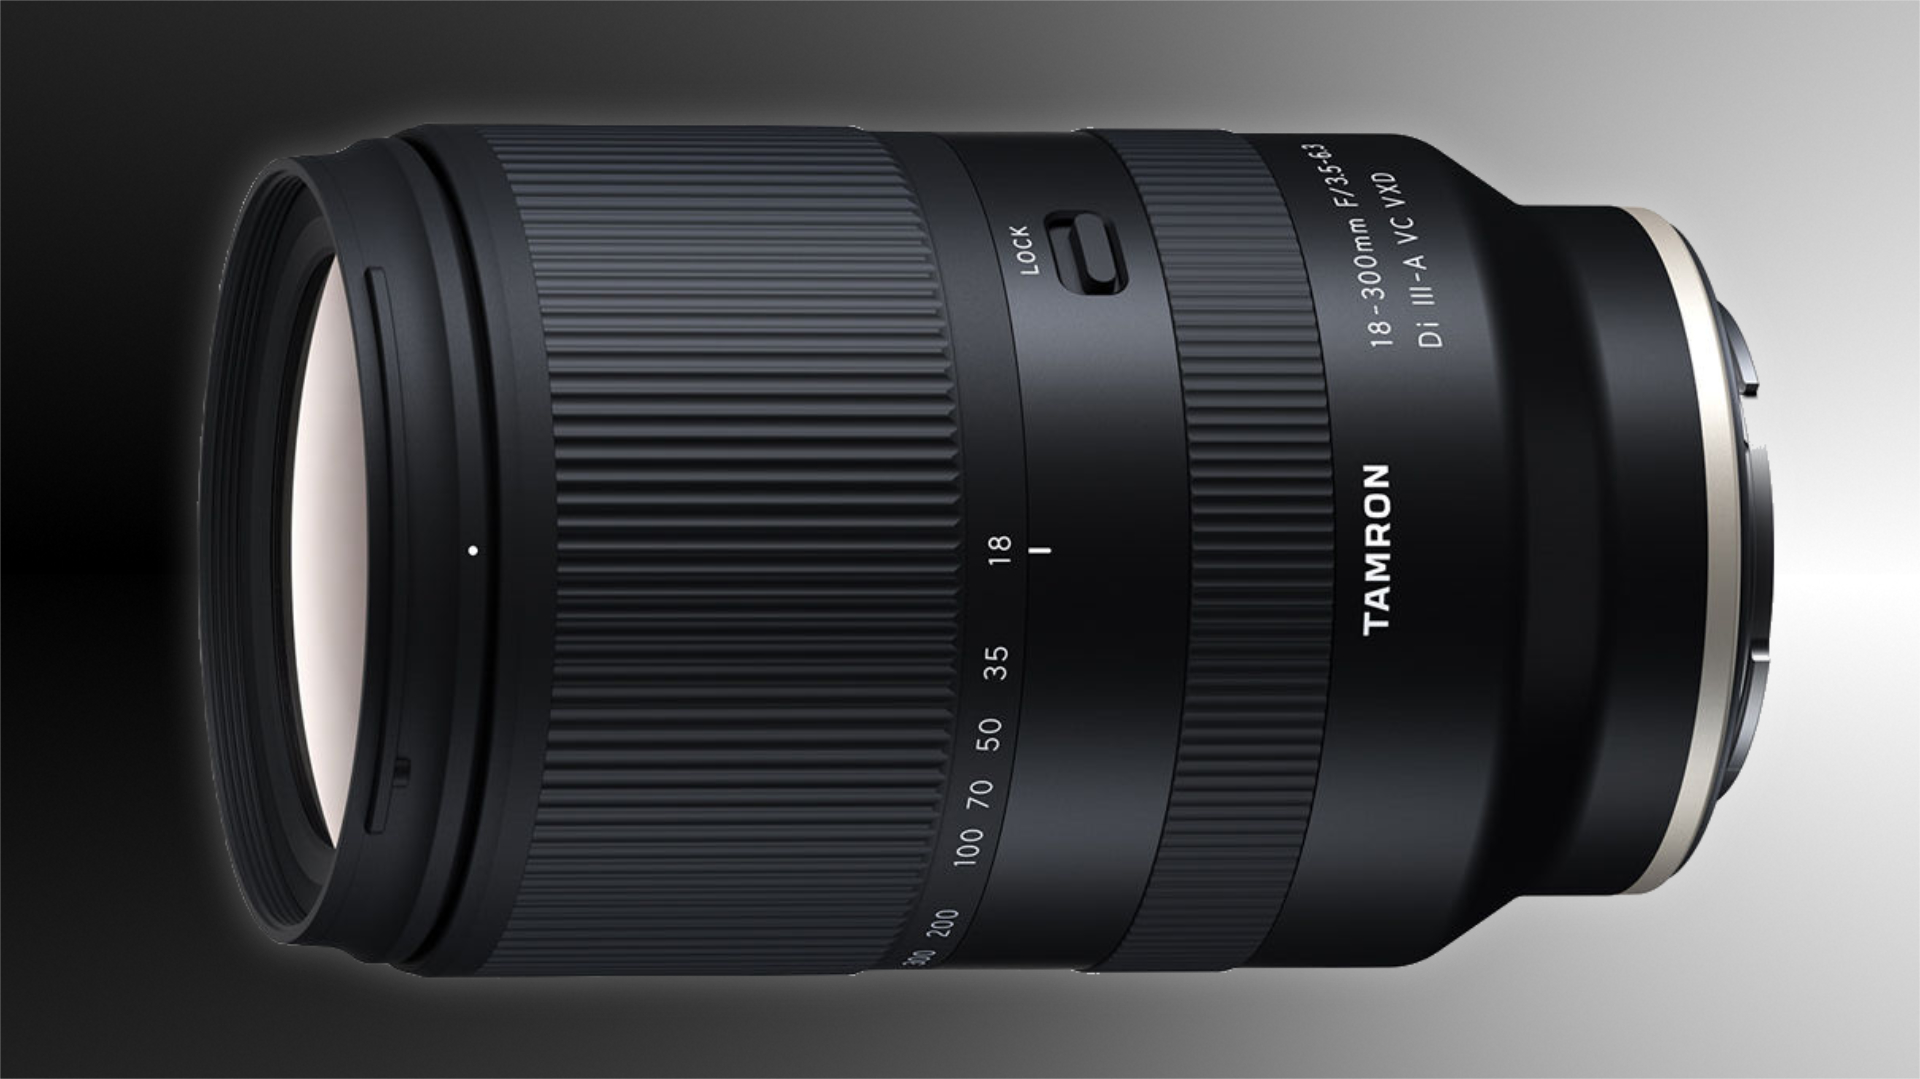 Tamron 18-300mm F3.5-6.3 Zoom for FUJIFILM and Sony Cameras Announced |  CineD